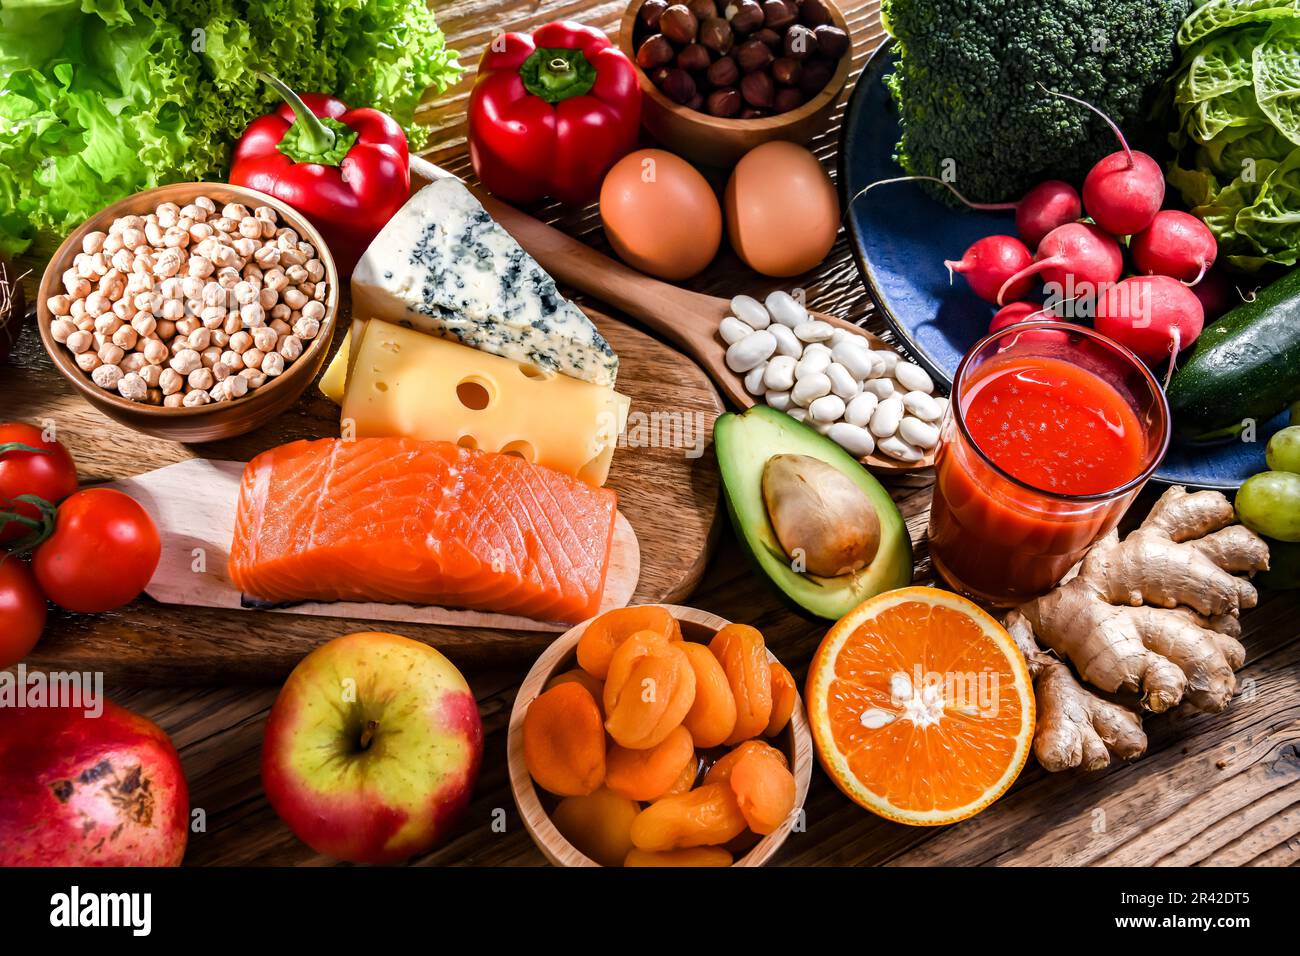 Food products representing the nutritarian diet which may improve overall health status Stock Photo